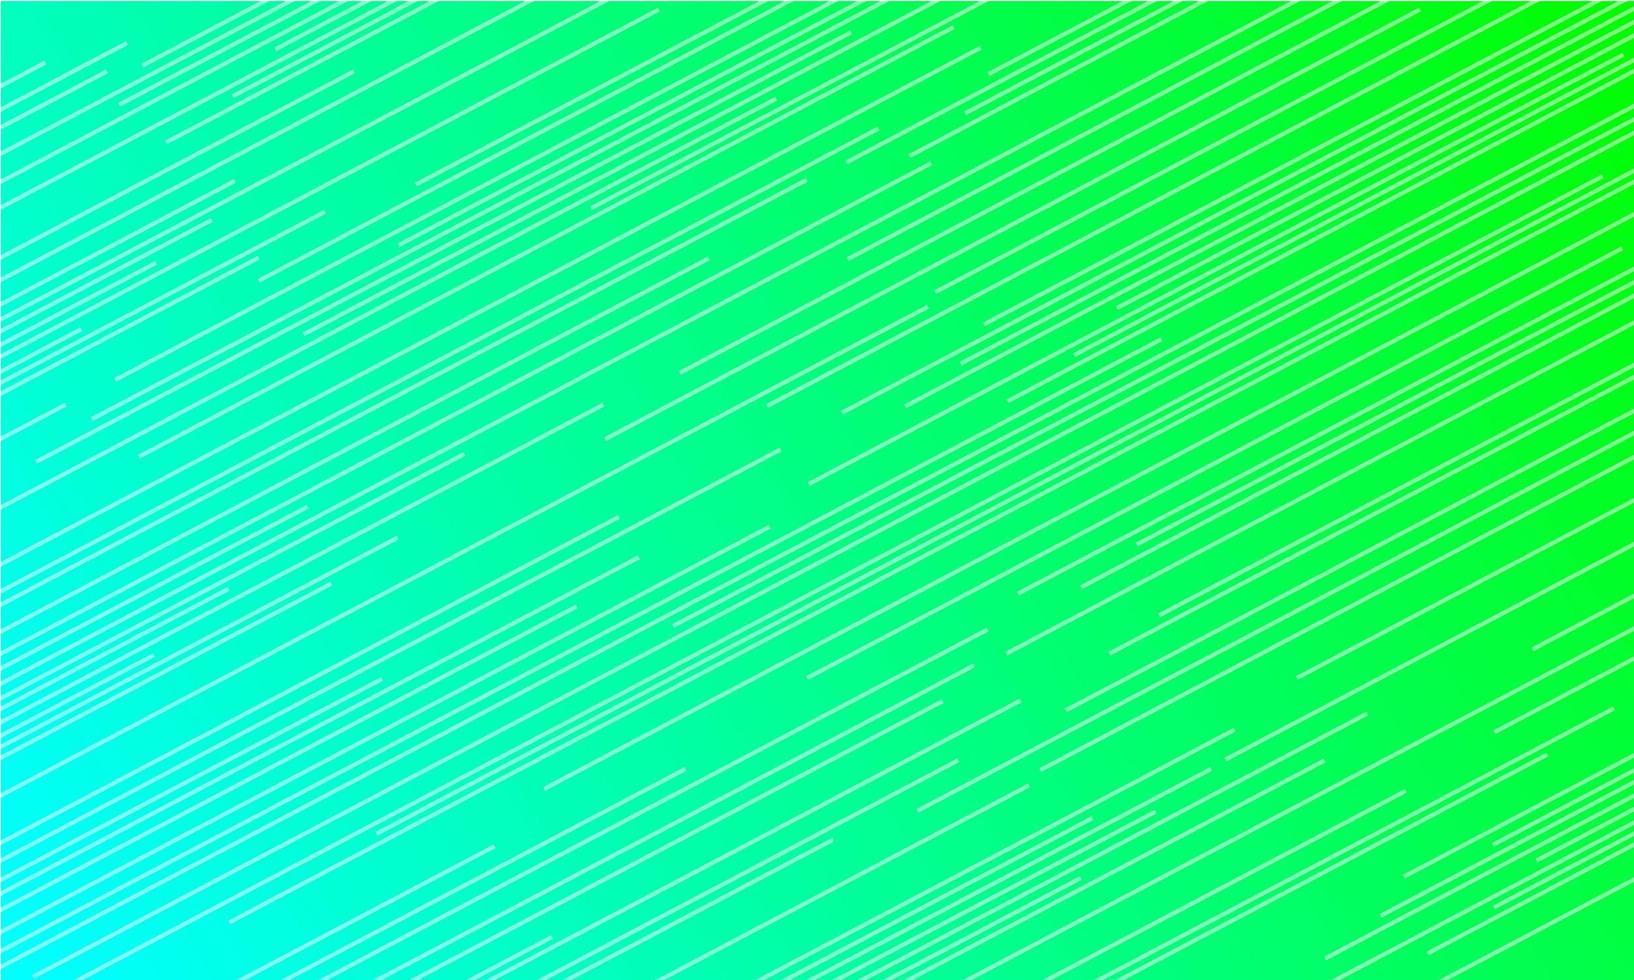 Green stripes abstract background vector